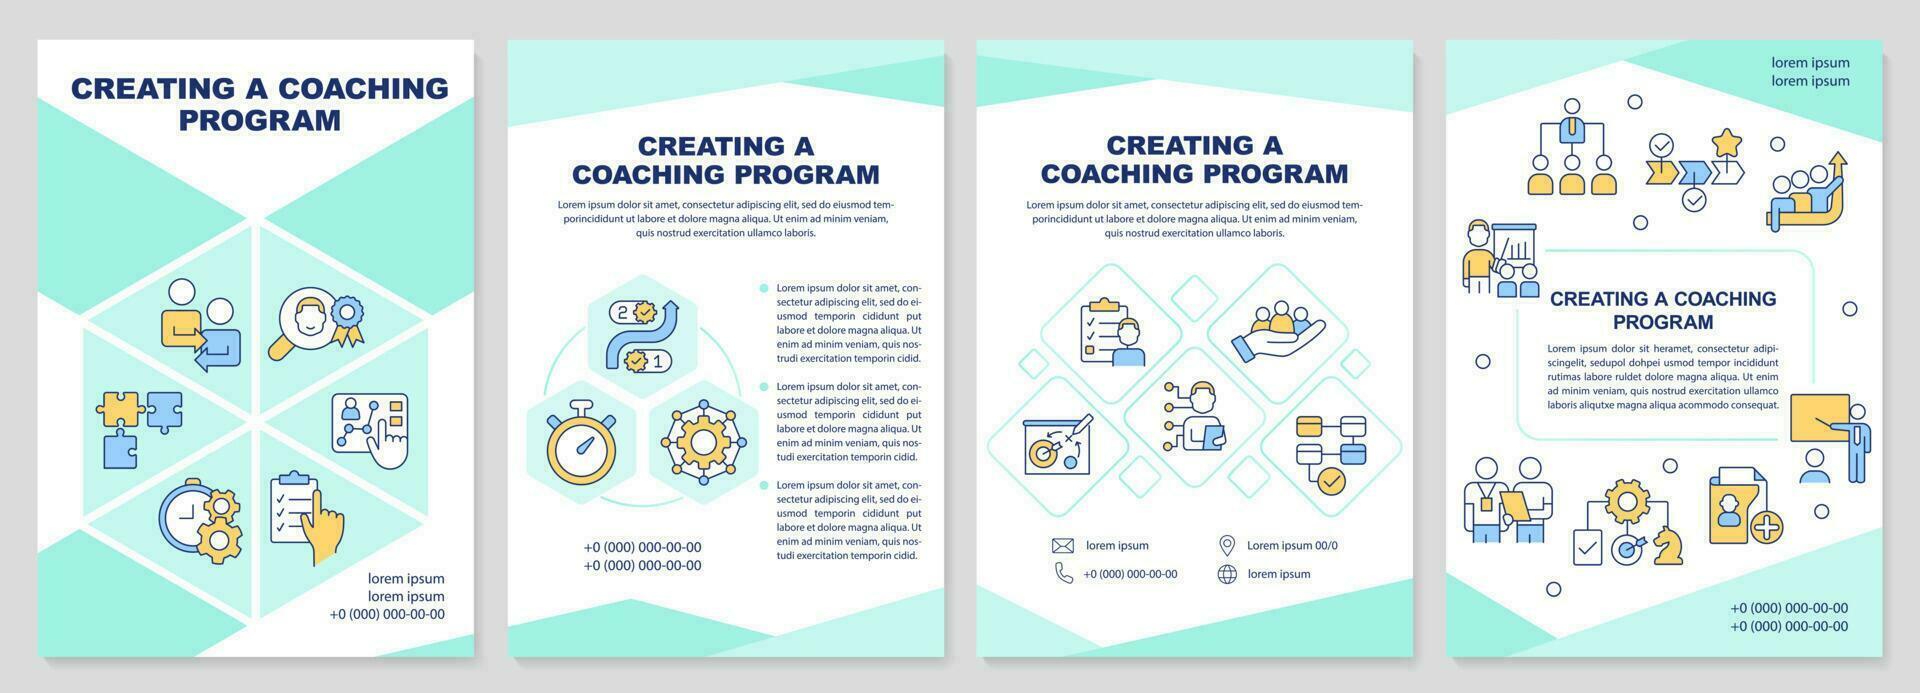 Creating coaching program mint brochure template. Leaflet design with linear icons. Editable 4 vector layouts for presentation, annual reports